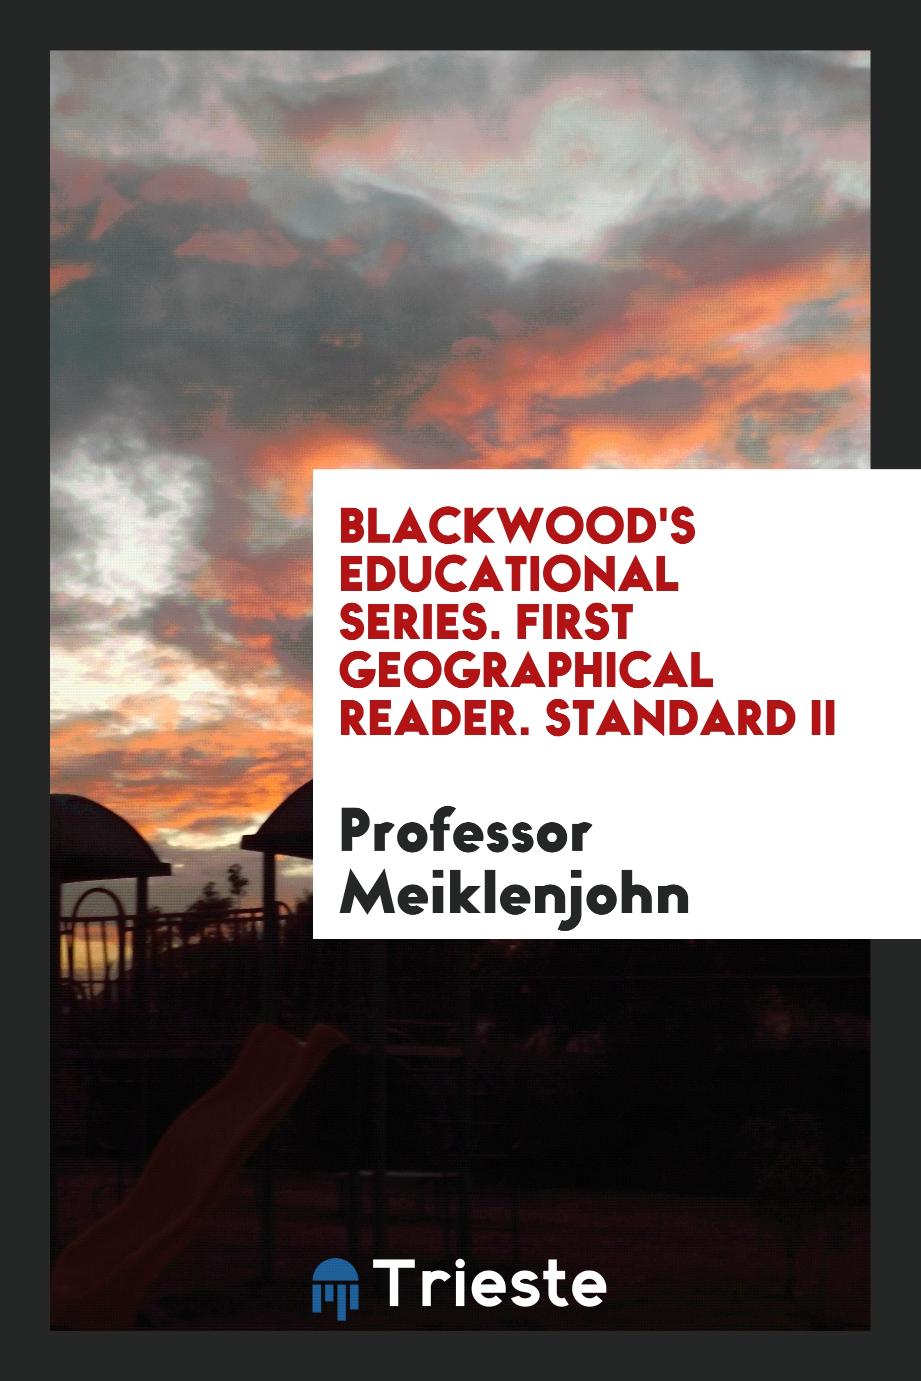 Blackwood's Educational Series. First Geographical Reader. Standard II